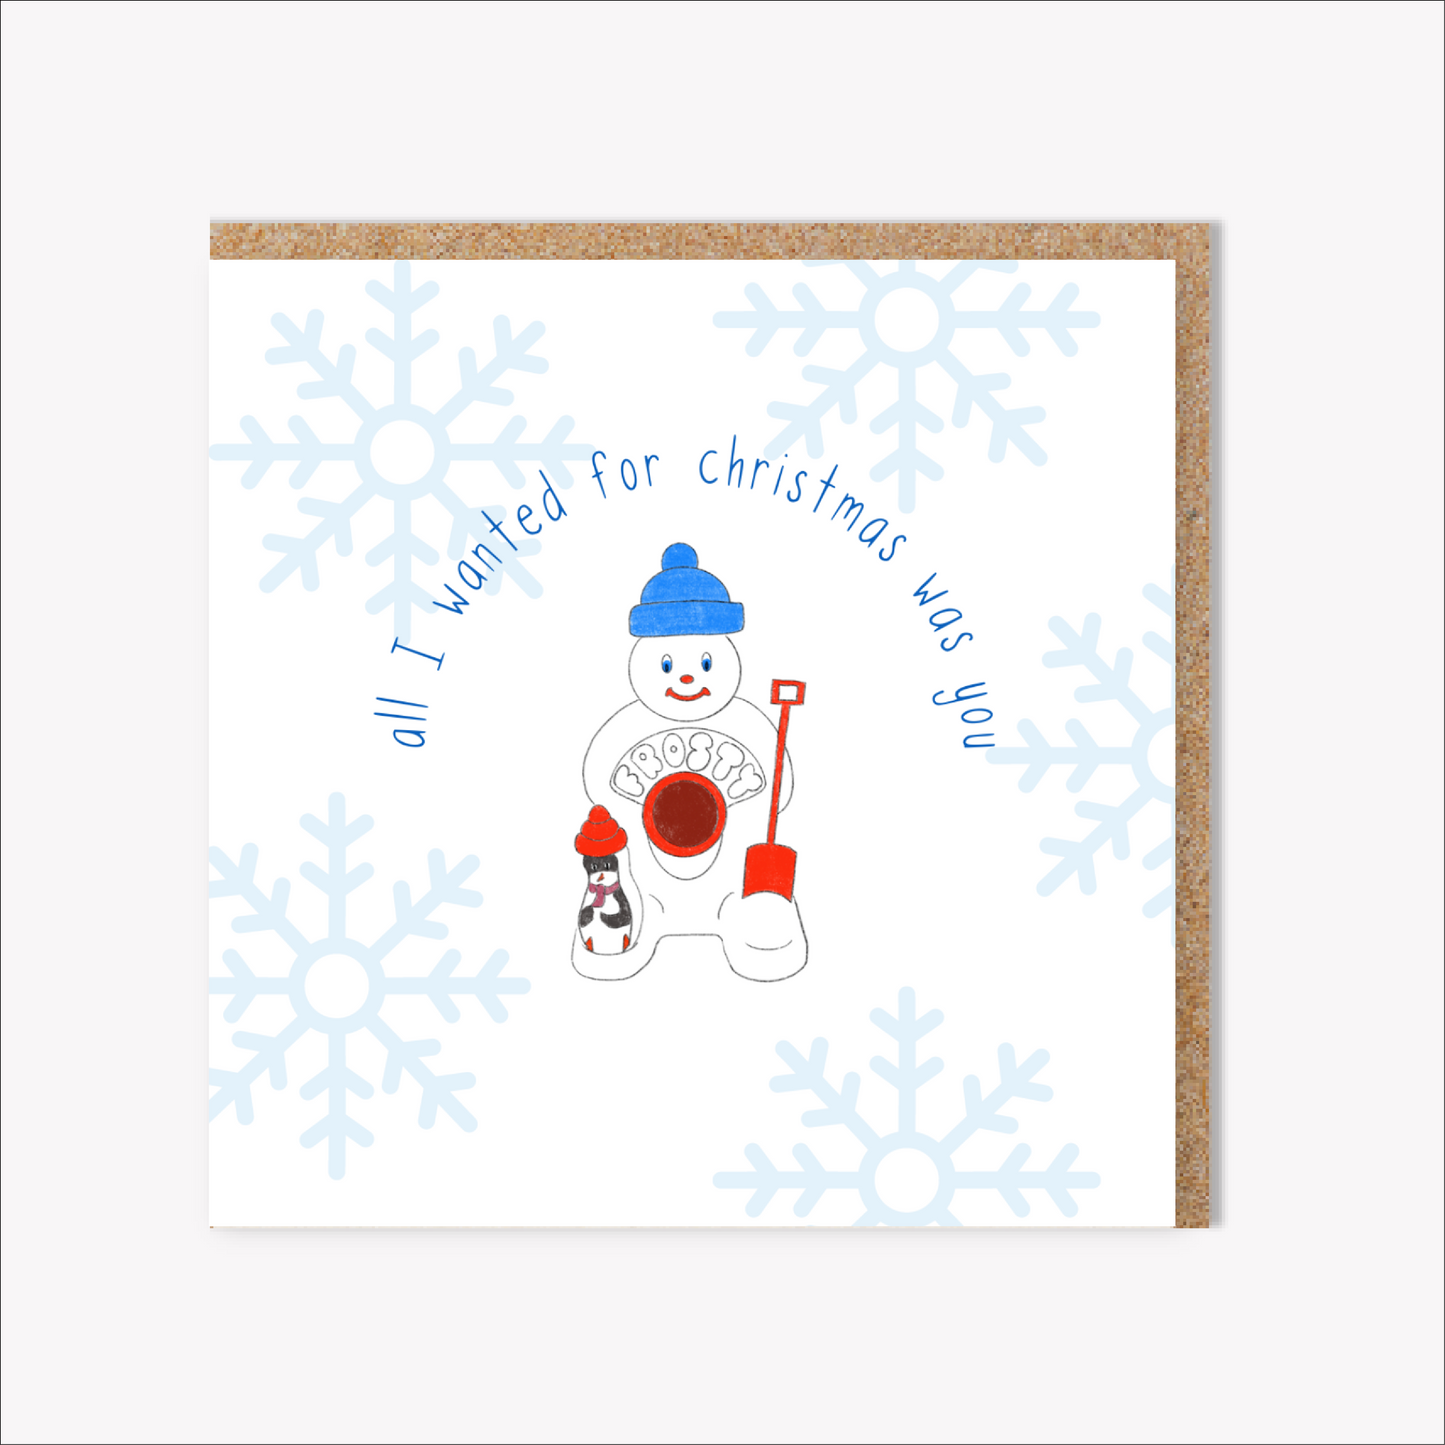 Mr Frosty 80’s and 90’s kids nostalgia Christmas card